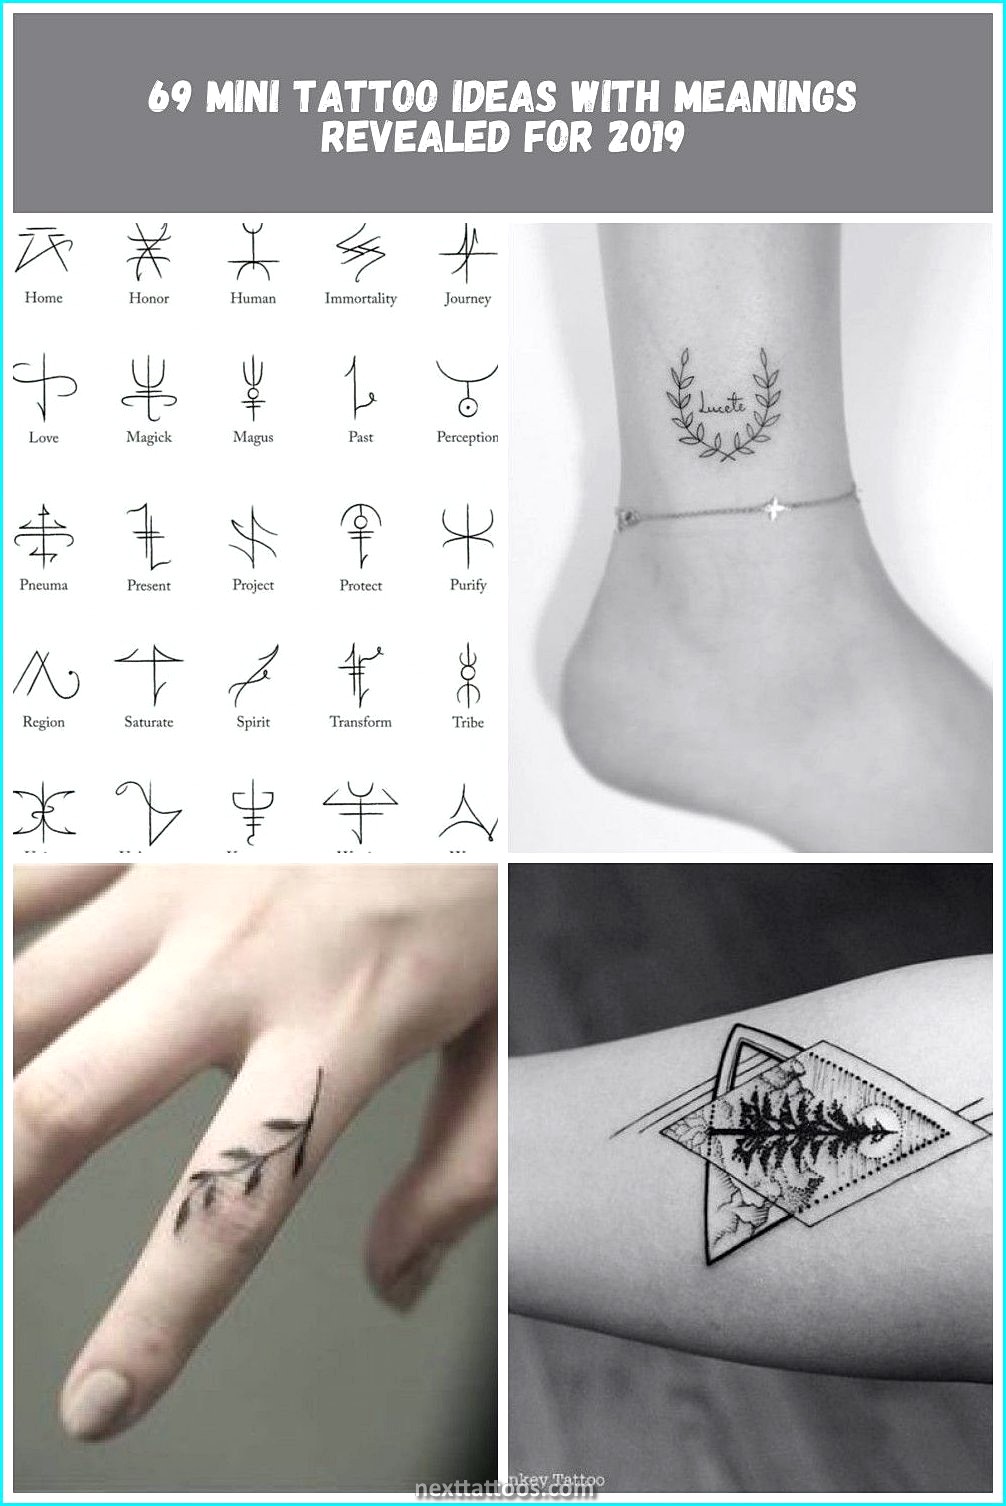 How to Find Your Next Tattoo